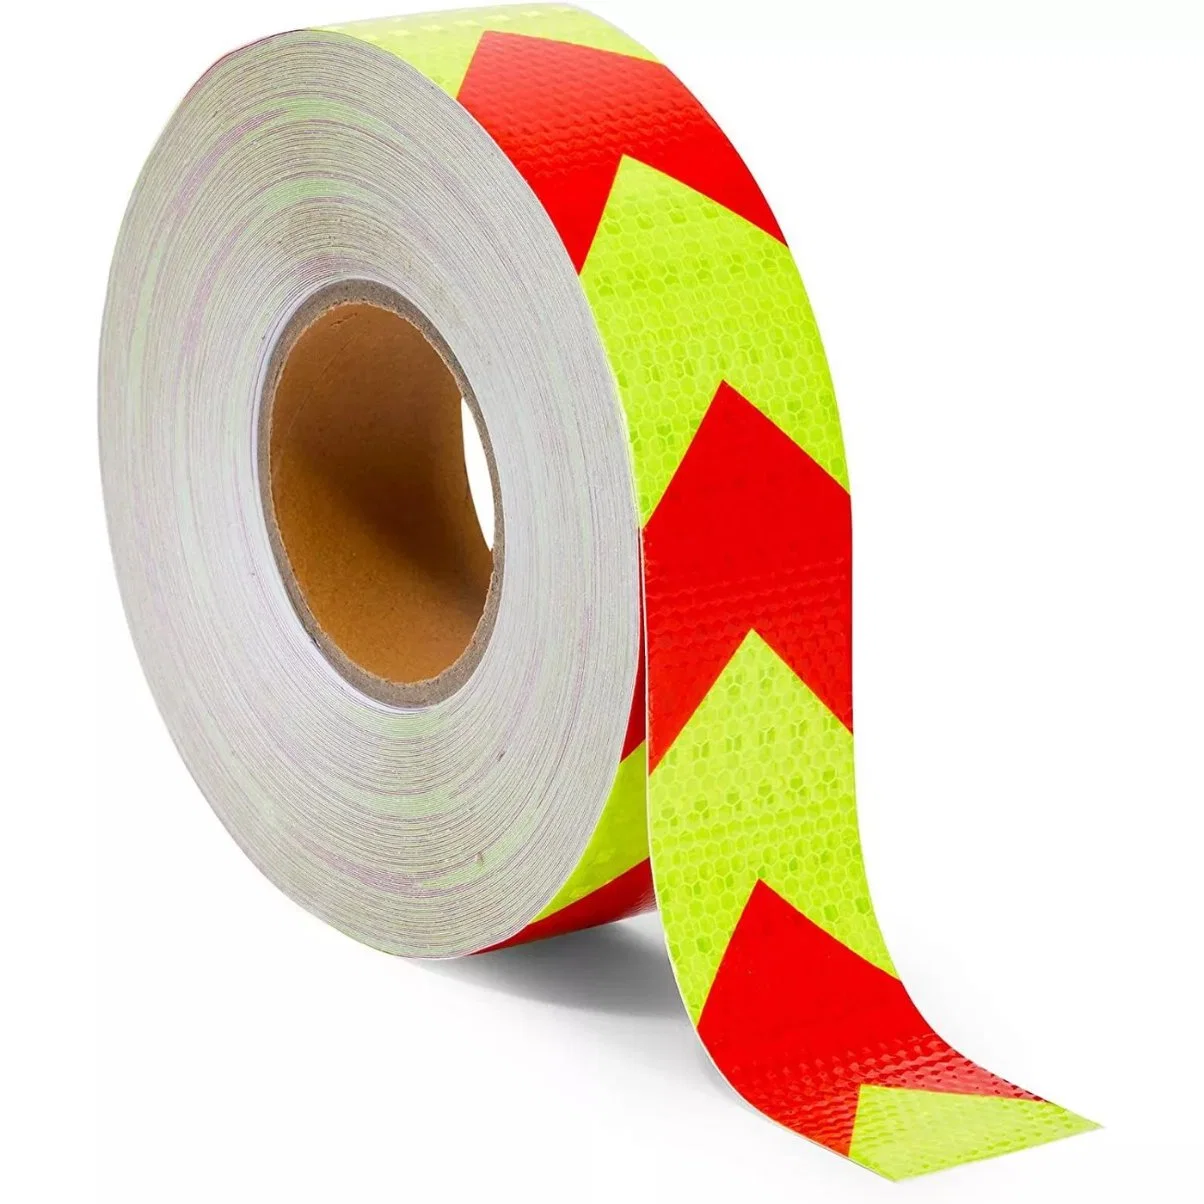 High Visibility Arrow Pattern PVC Safety Reflective Tape for Trucks, Trailers, Heavy Vehicles